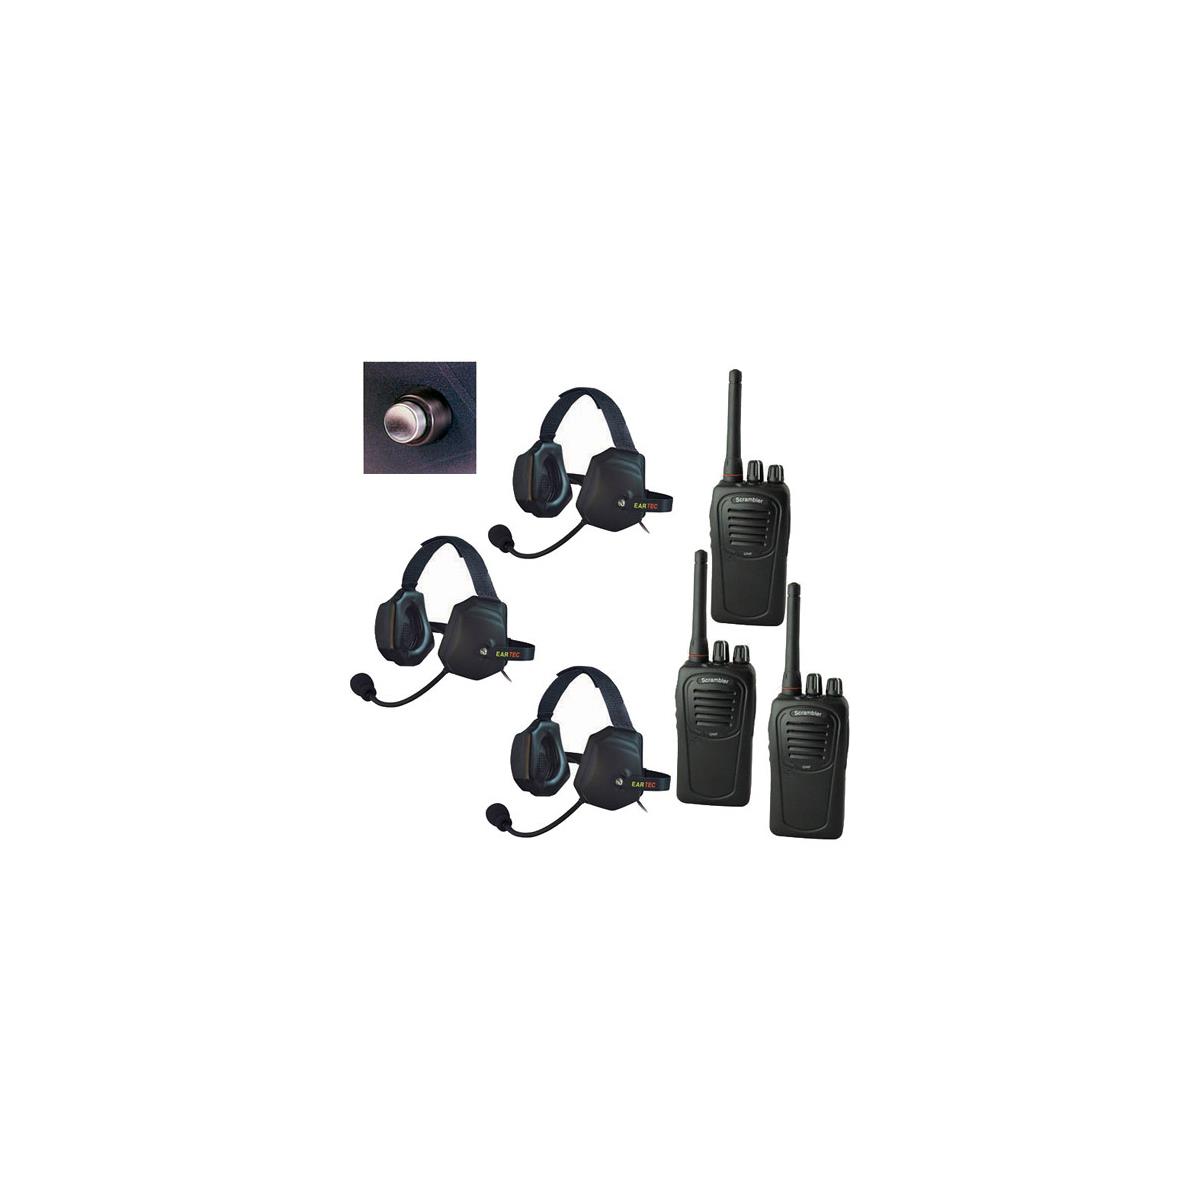 Image of Eartec SC-1000 3-User Two-Way Radio System